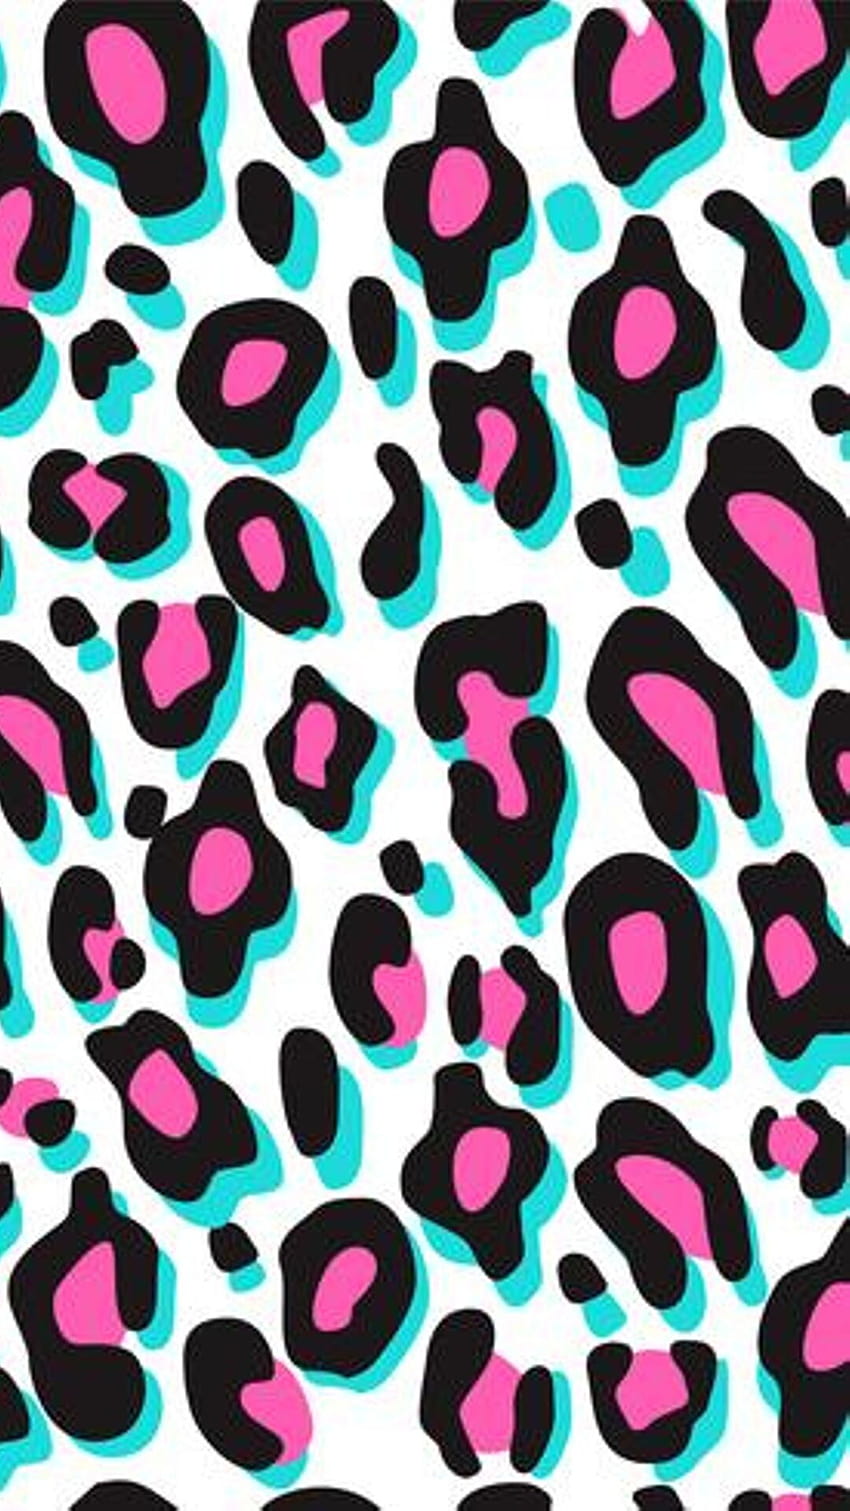 Animal Print Pink posted by Michelle Sellers, pink cheetah print HD phone wallpaper